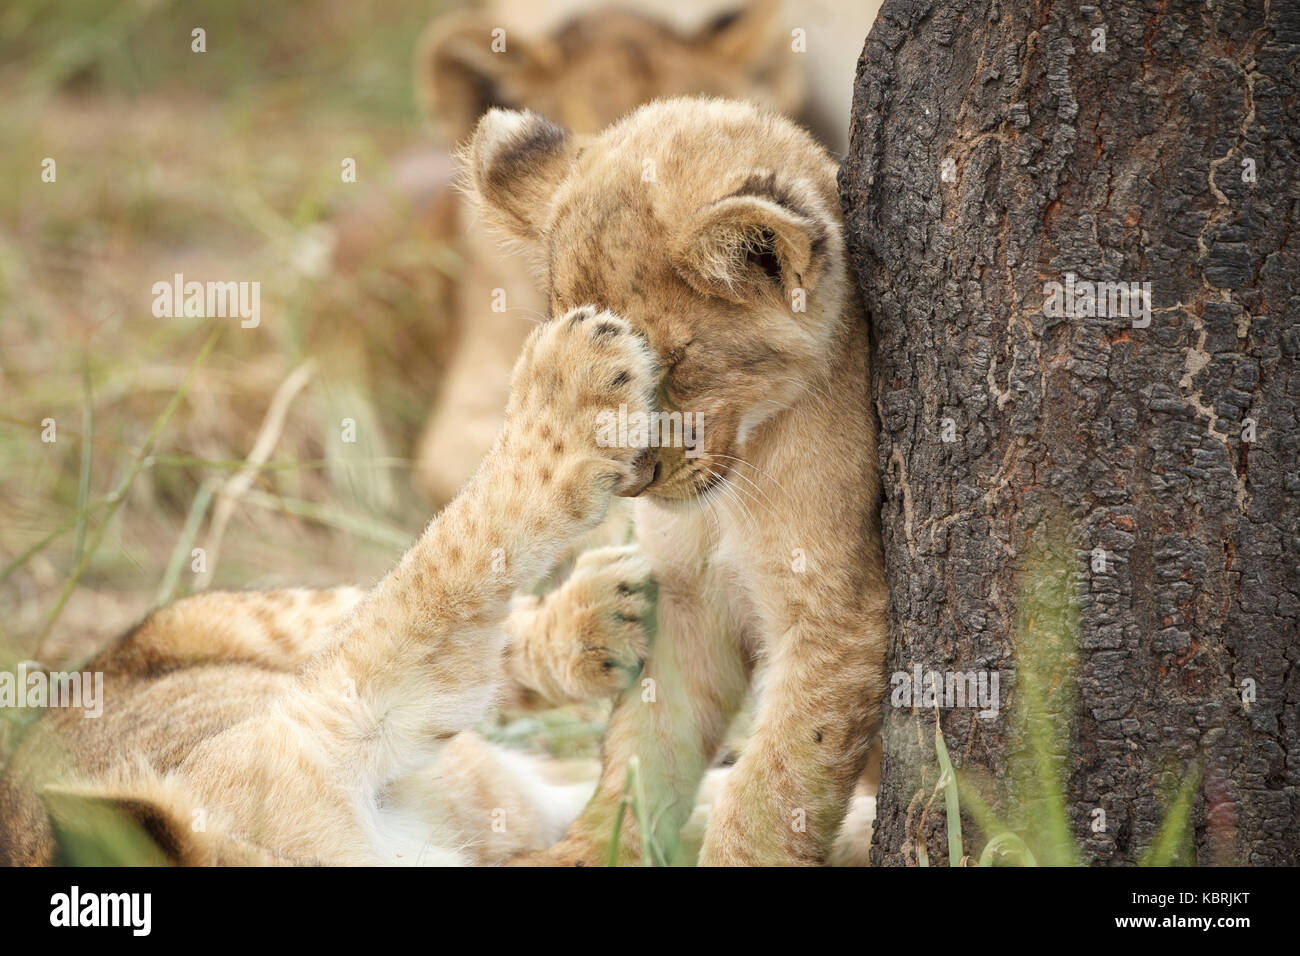 2 lion cubs playing fighting and biting Stock Photo